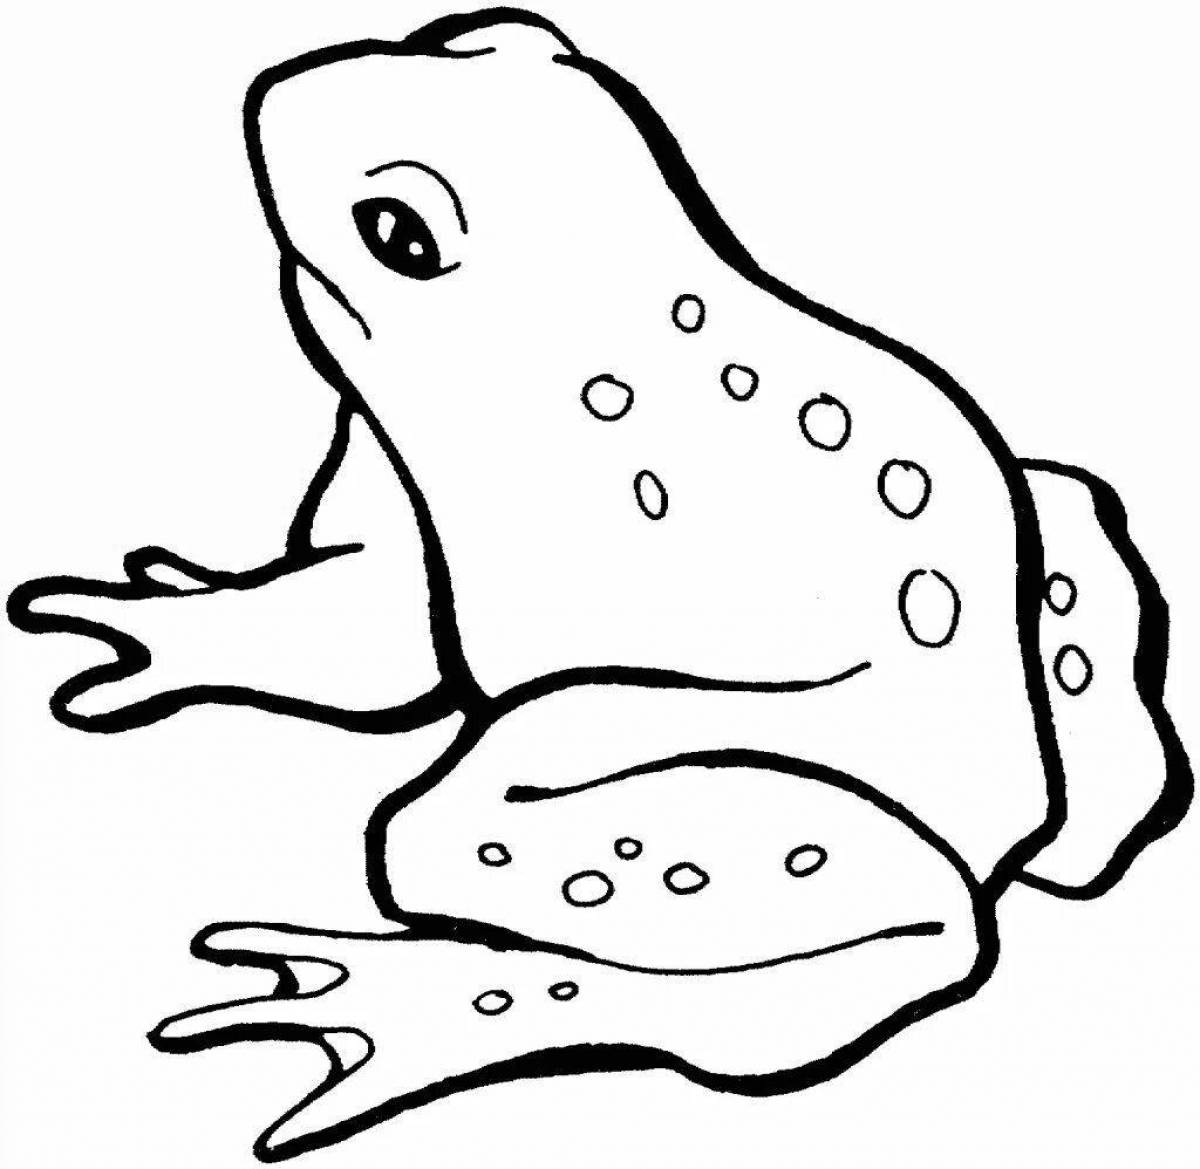 Frog drawing for kids #1